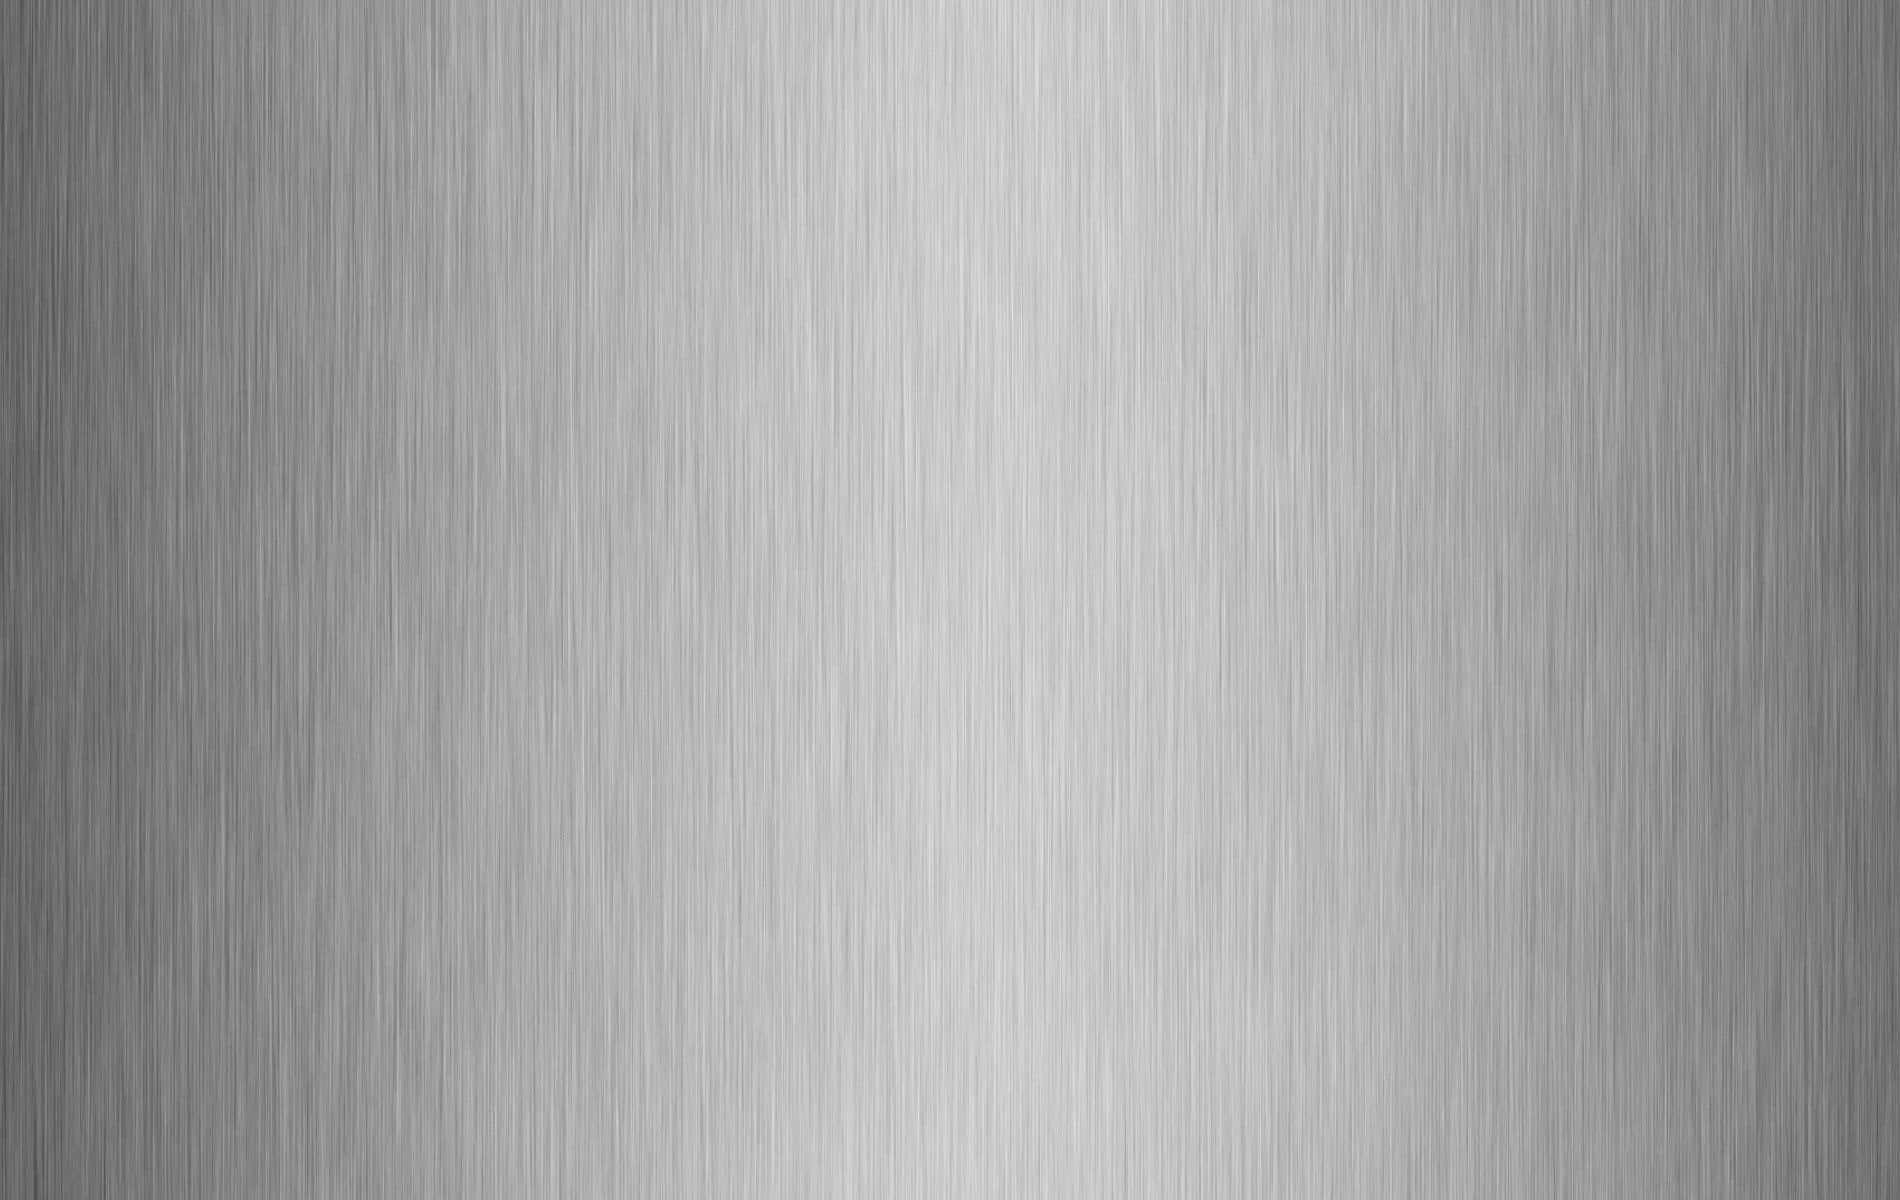 A Silver Metal Background With A Textured Surface